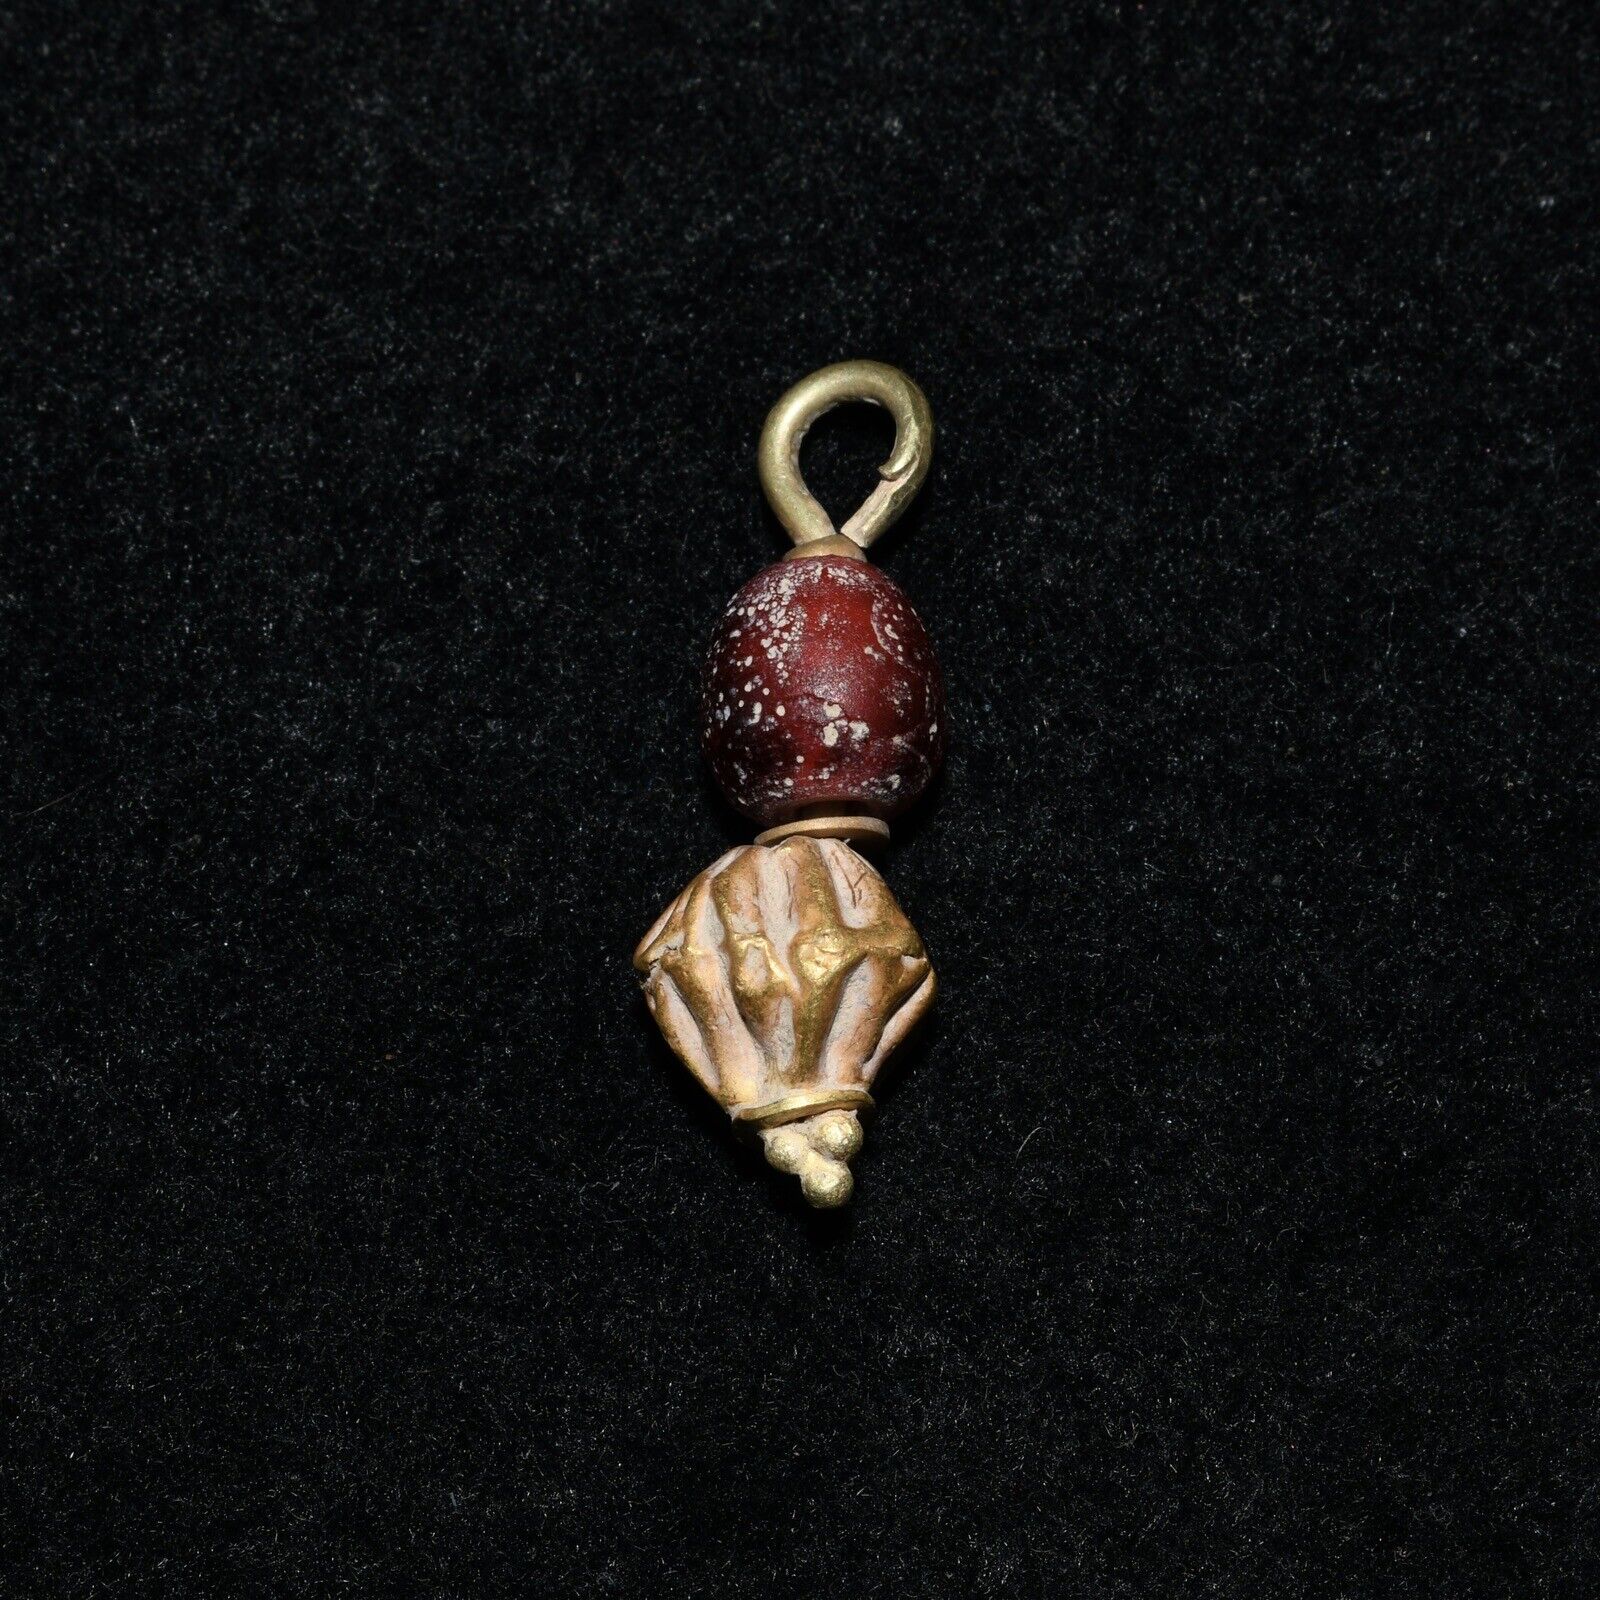 Genuine Ancient Roman Solid Gold Pendant with Garnet Inlay C. 1st-2nd Century AD